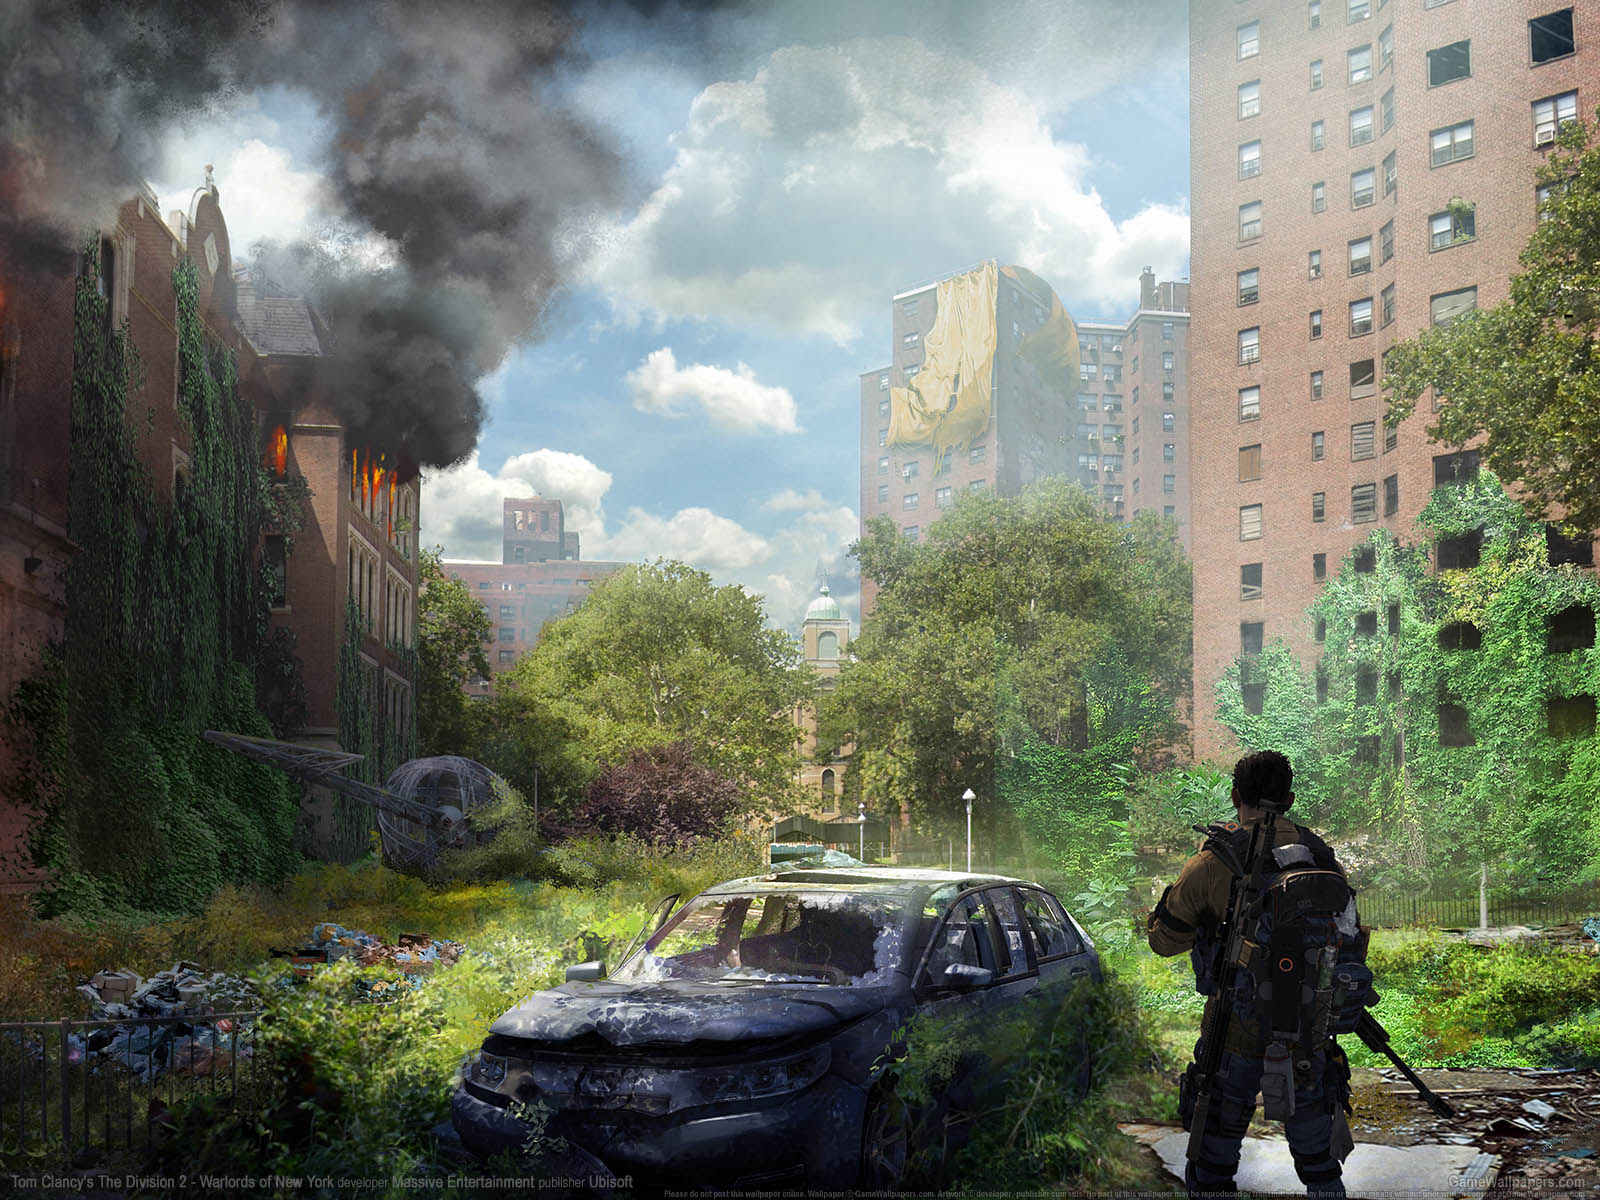 Tom Clancy%5C%27s The Division 2 - Warlords of New York wallpaper 03 1600x1200